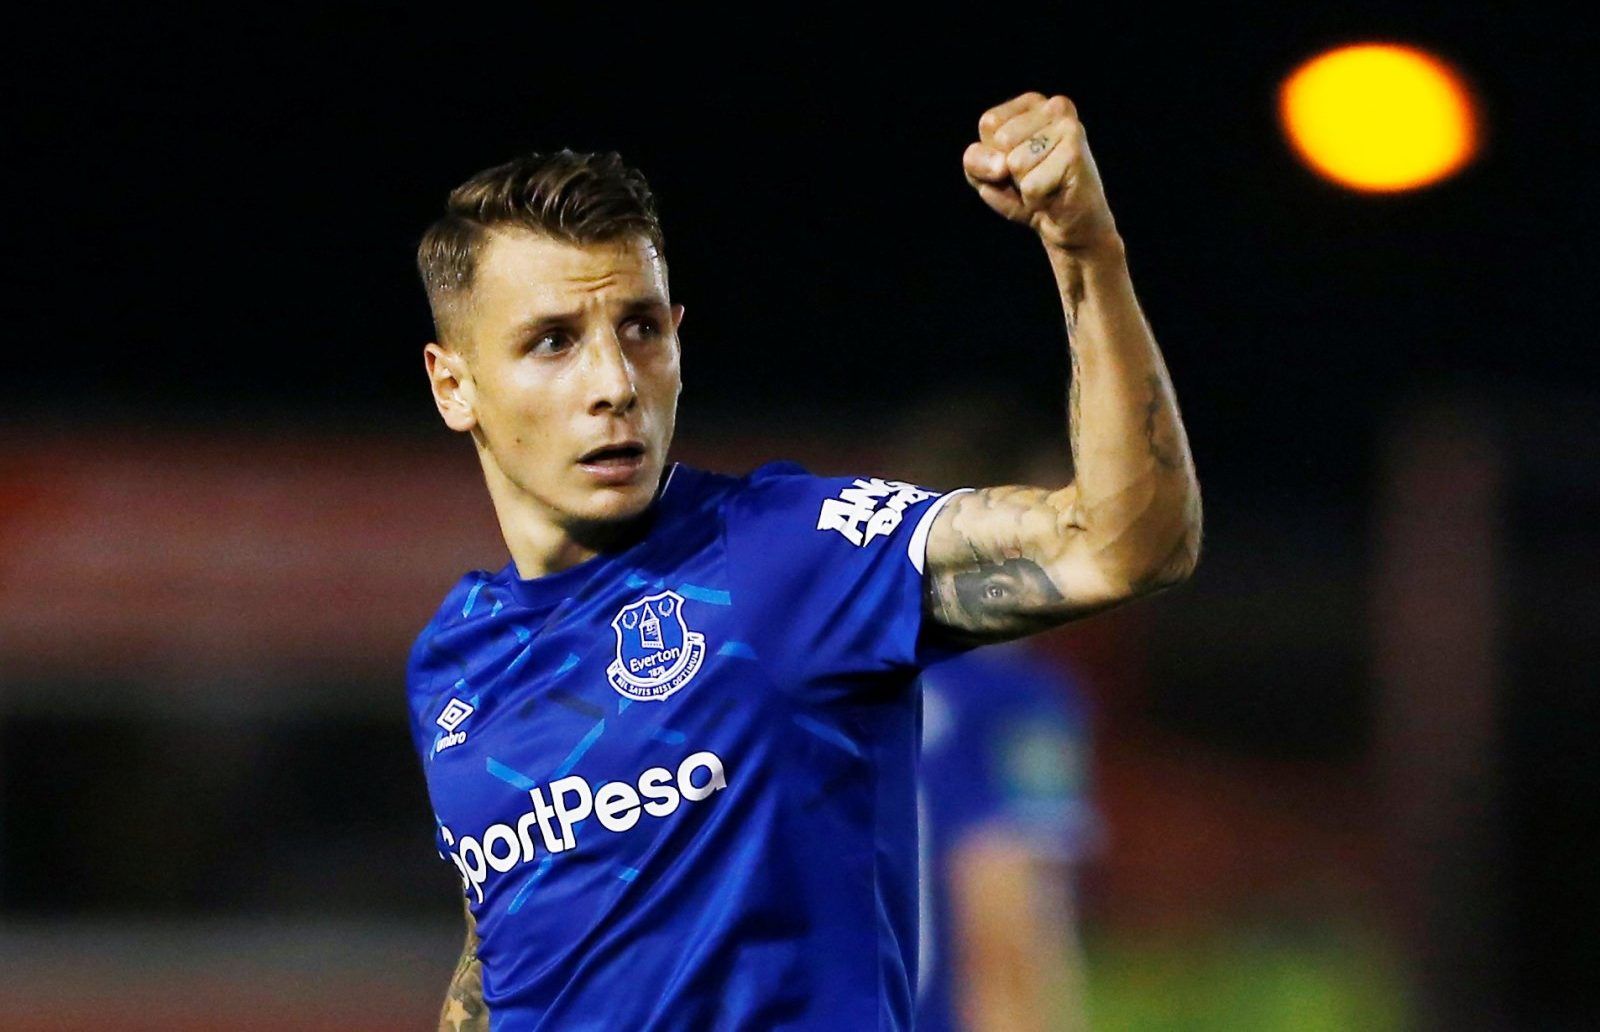 Everton's Lucas Digne celebrates scoring their first goal - Carabao Cup Second Round v Lincoln City